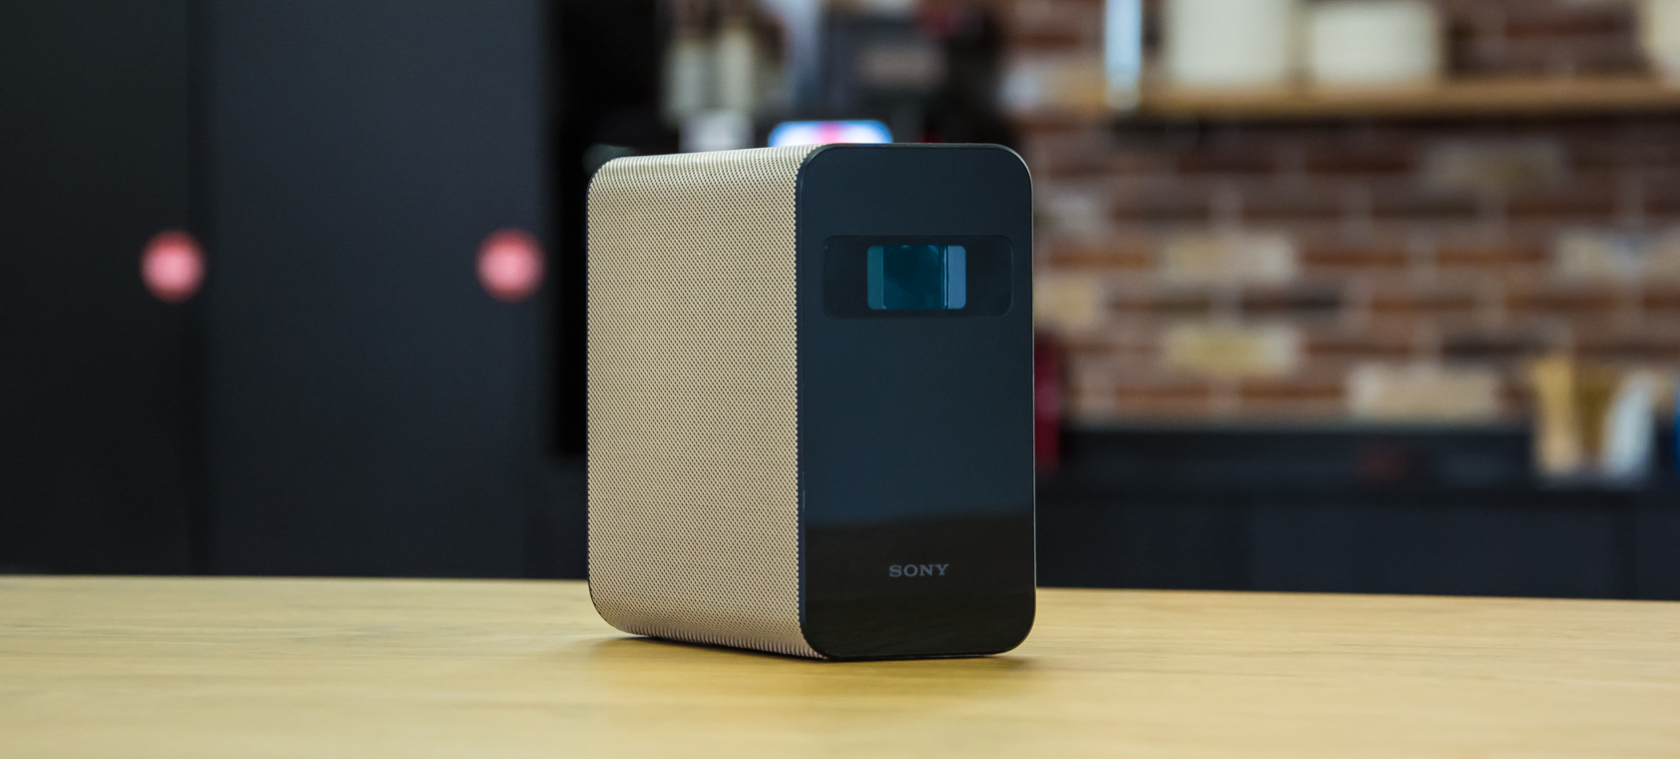 Sony's Xperia Touch projector is now available in the US